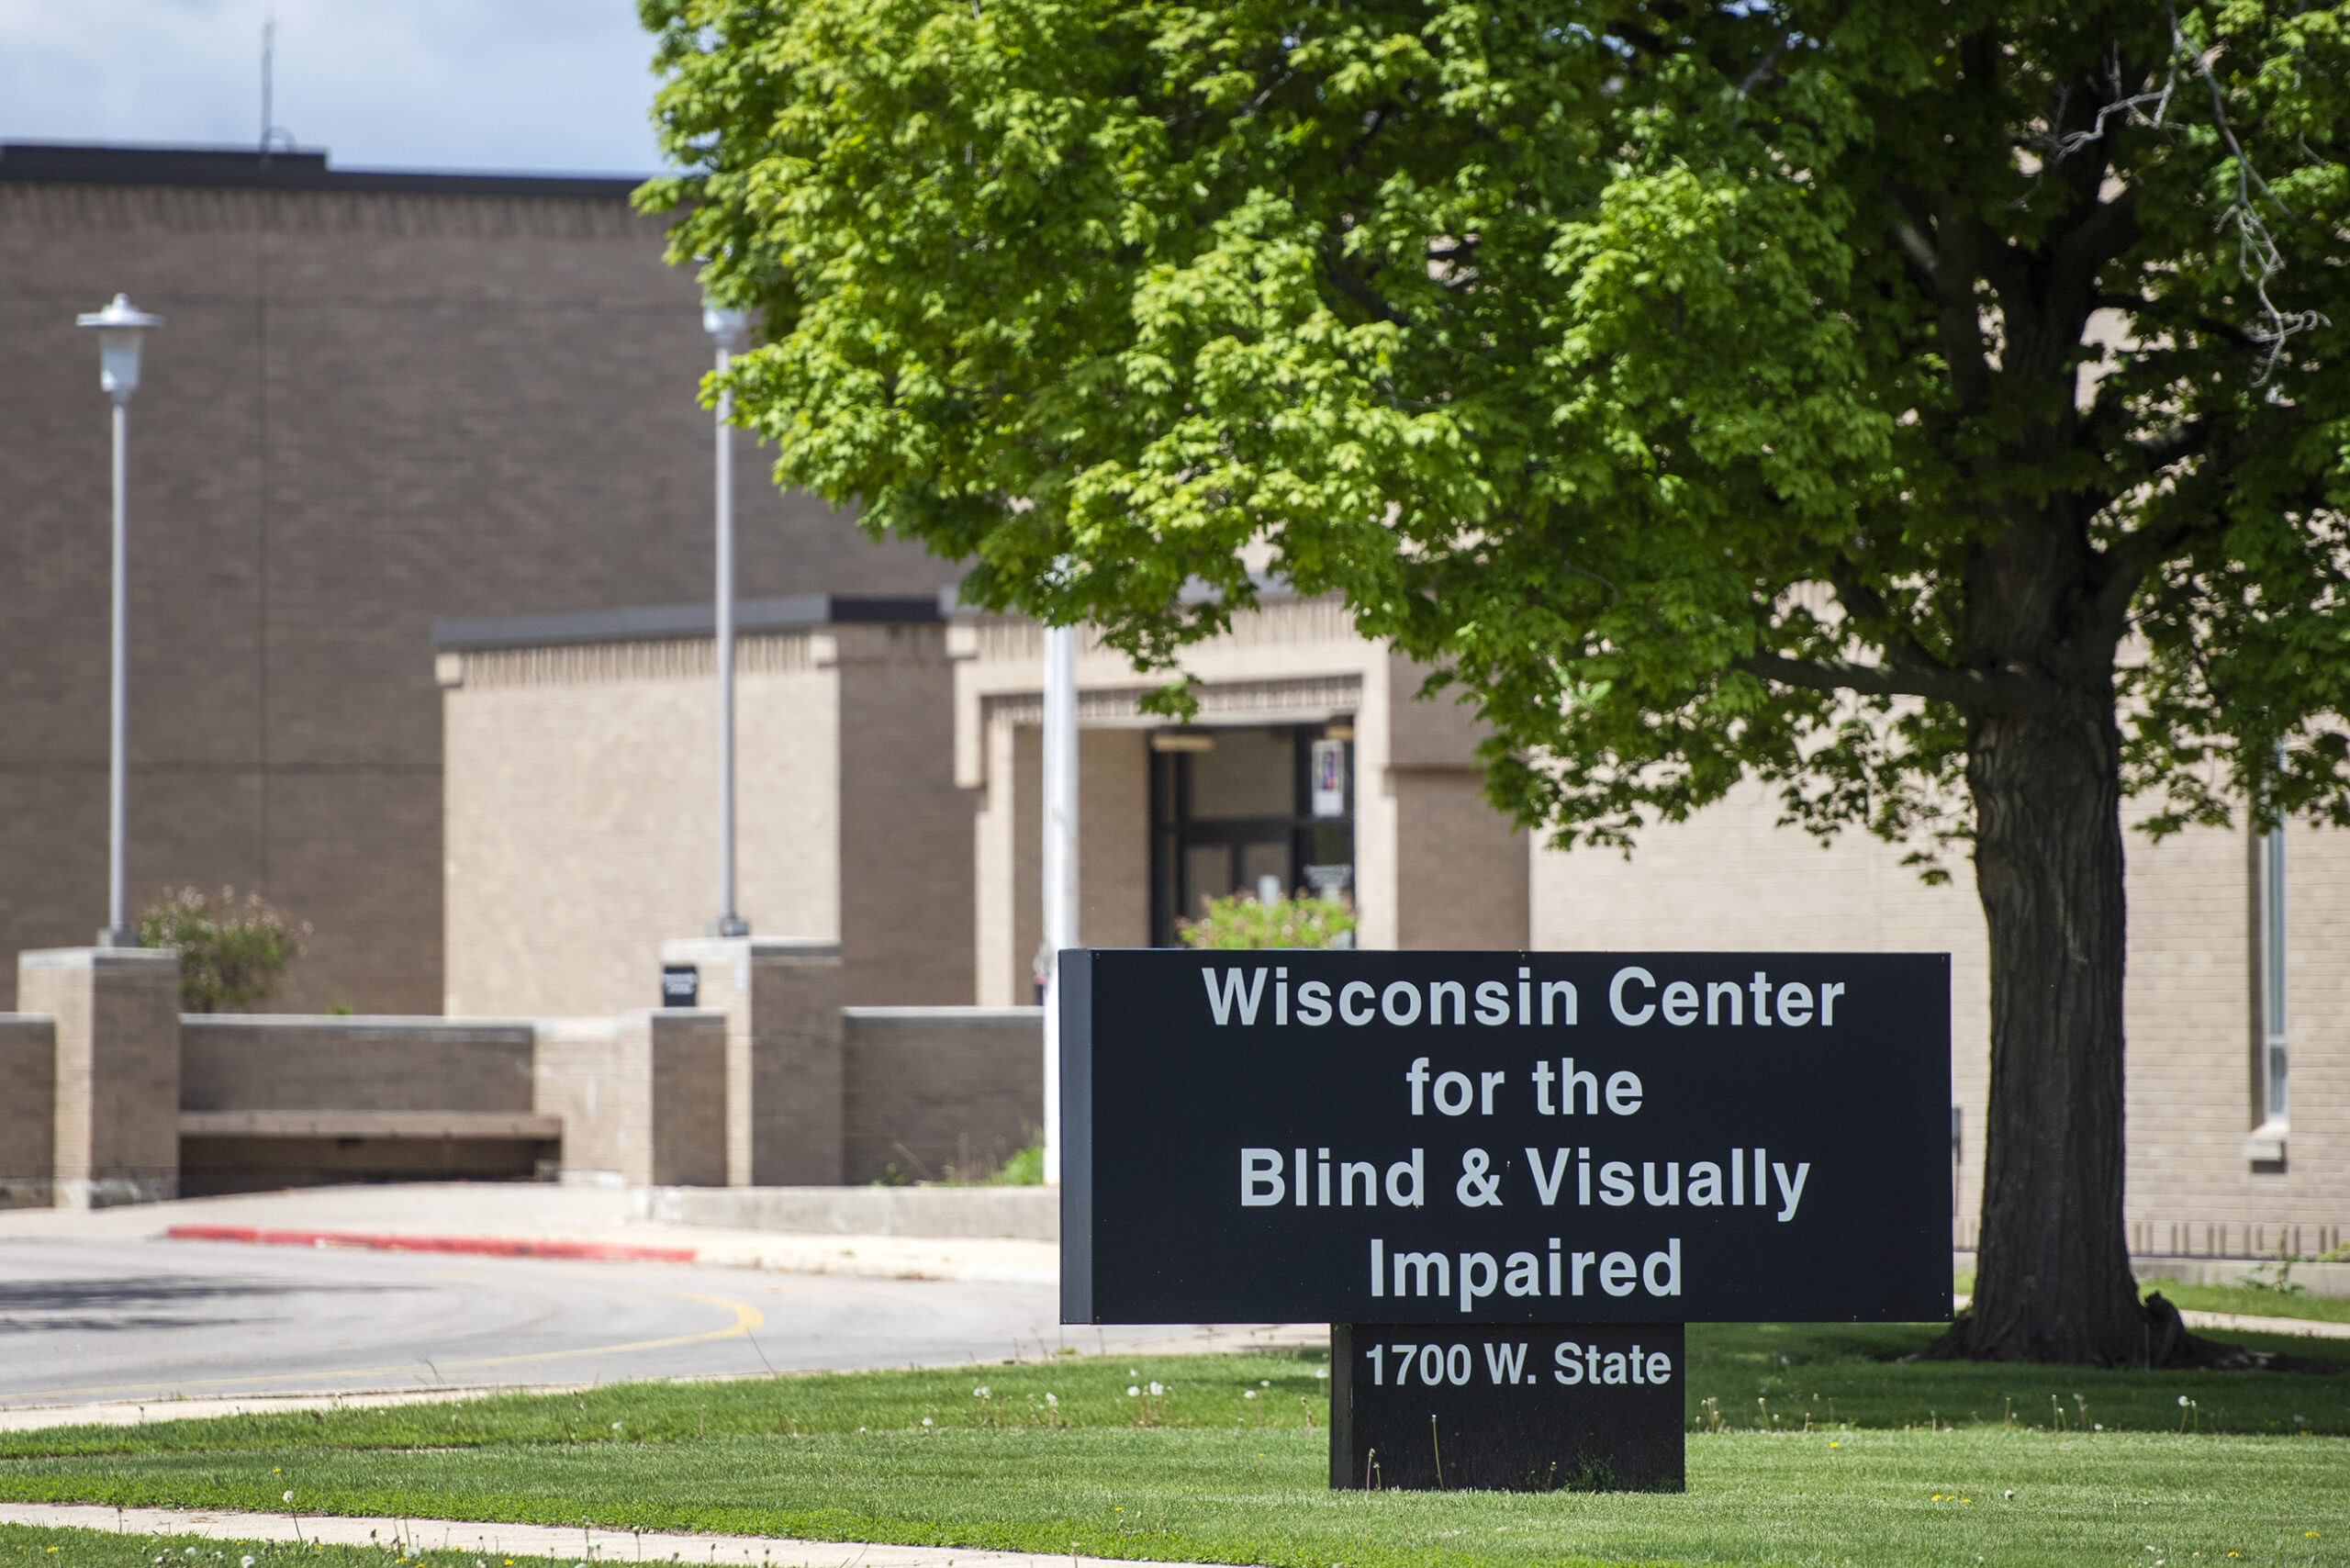 A sign says "Wisconsin Center for the Blind and Visually Impaired" under a tree with green leaves in front of a brick building.